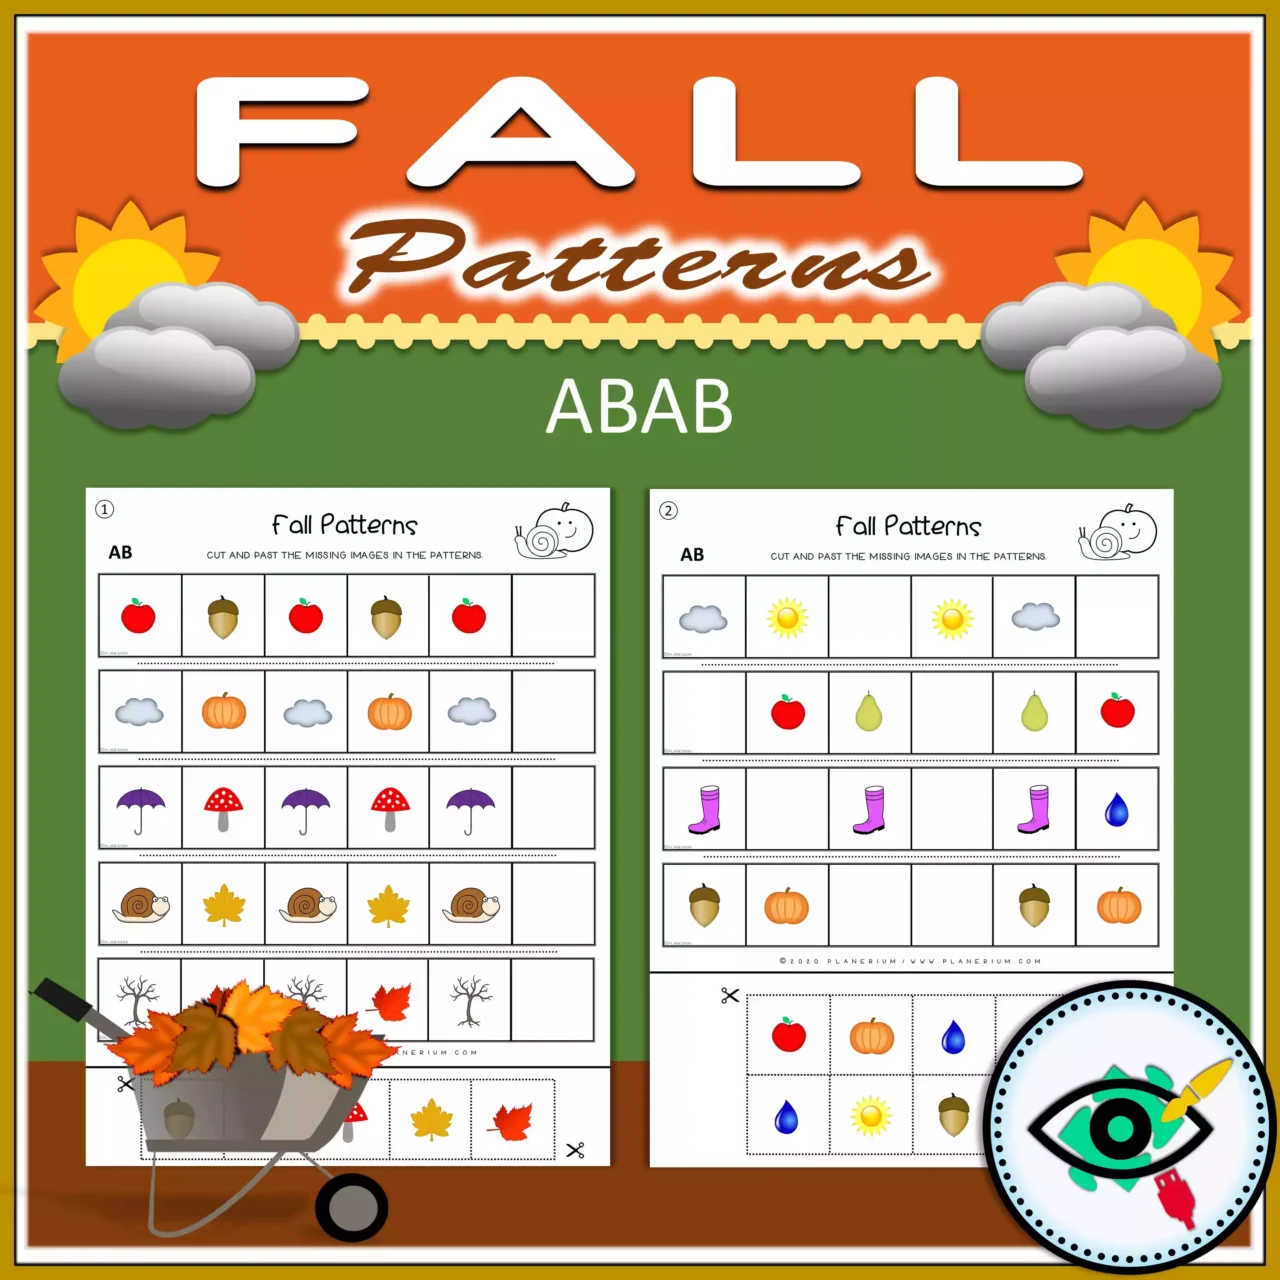 Fall - Patterns Activity - Image Title 2